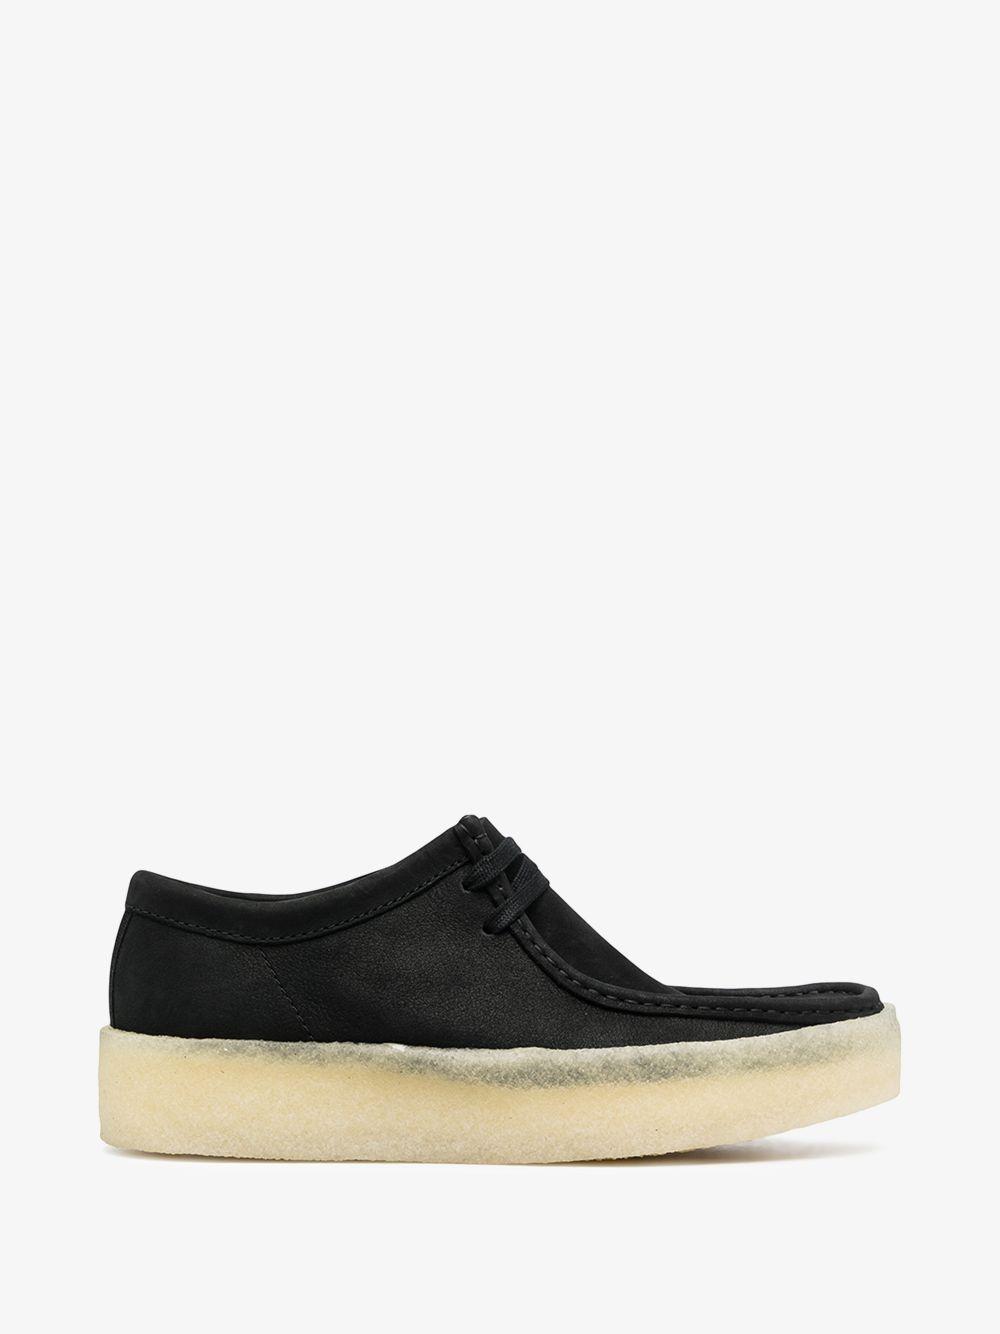 Clarks Wallabee Cup Leather Brogues in Black for Men | Lyst